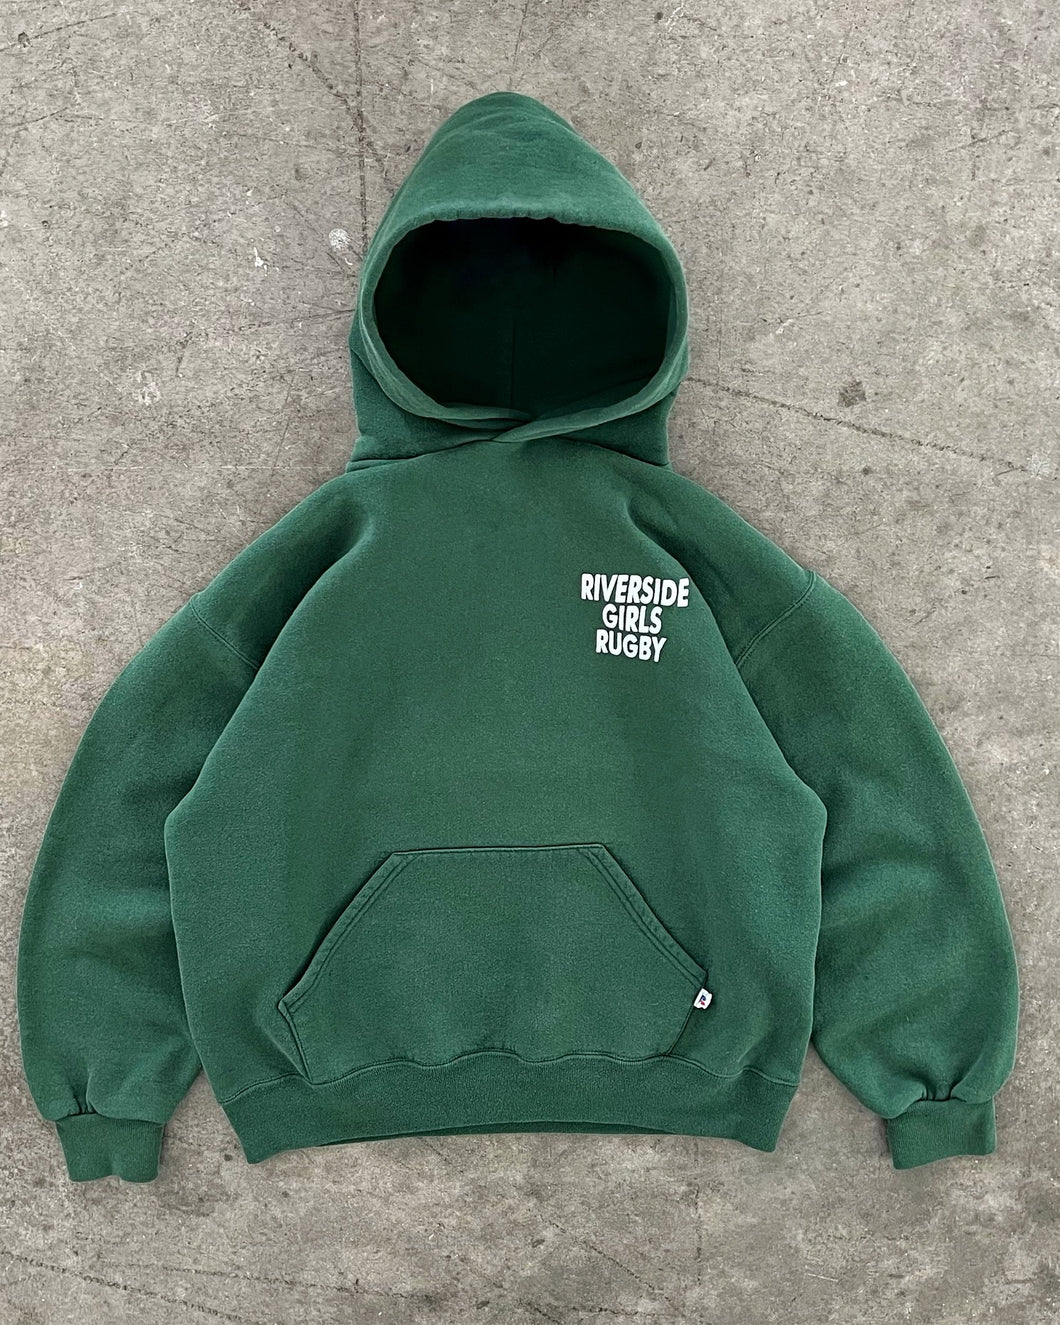 FADED PINE GREEN “RIVERSIDE GIRLS RUGBY” RUSSELL HOODIE - 1990S